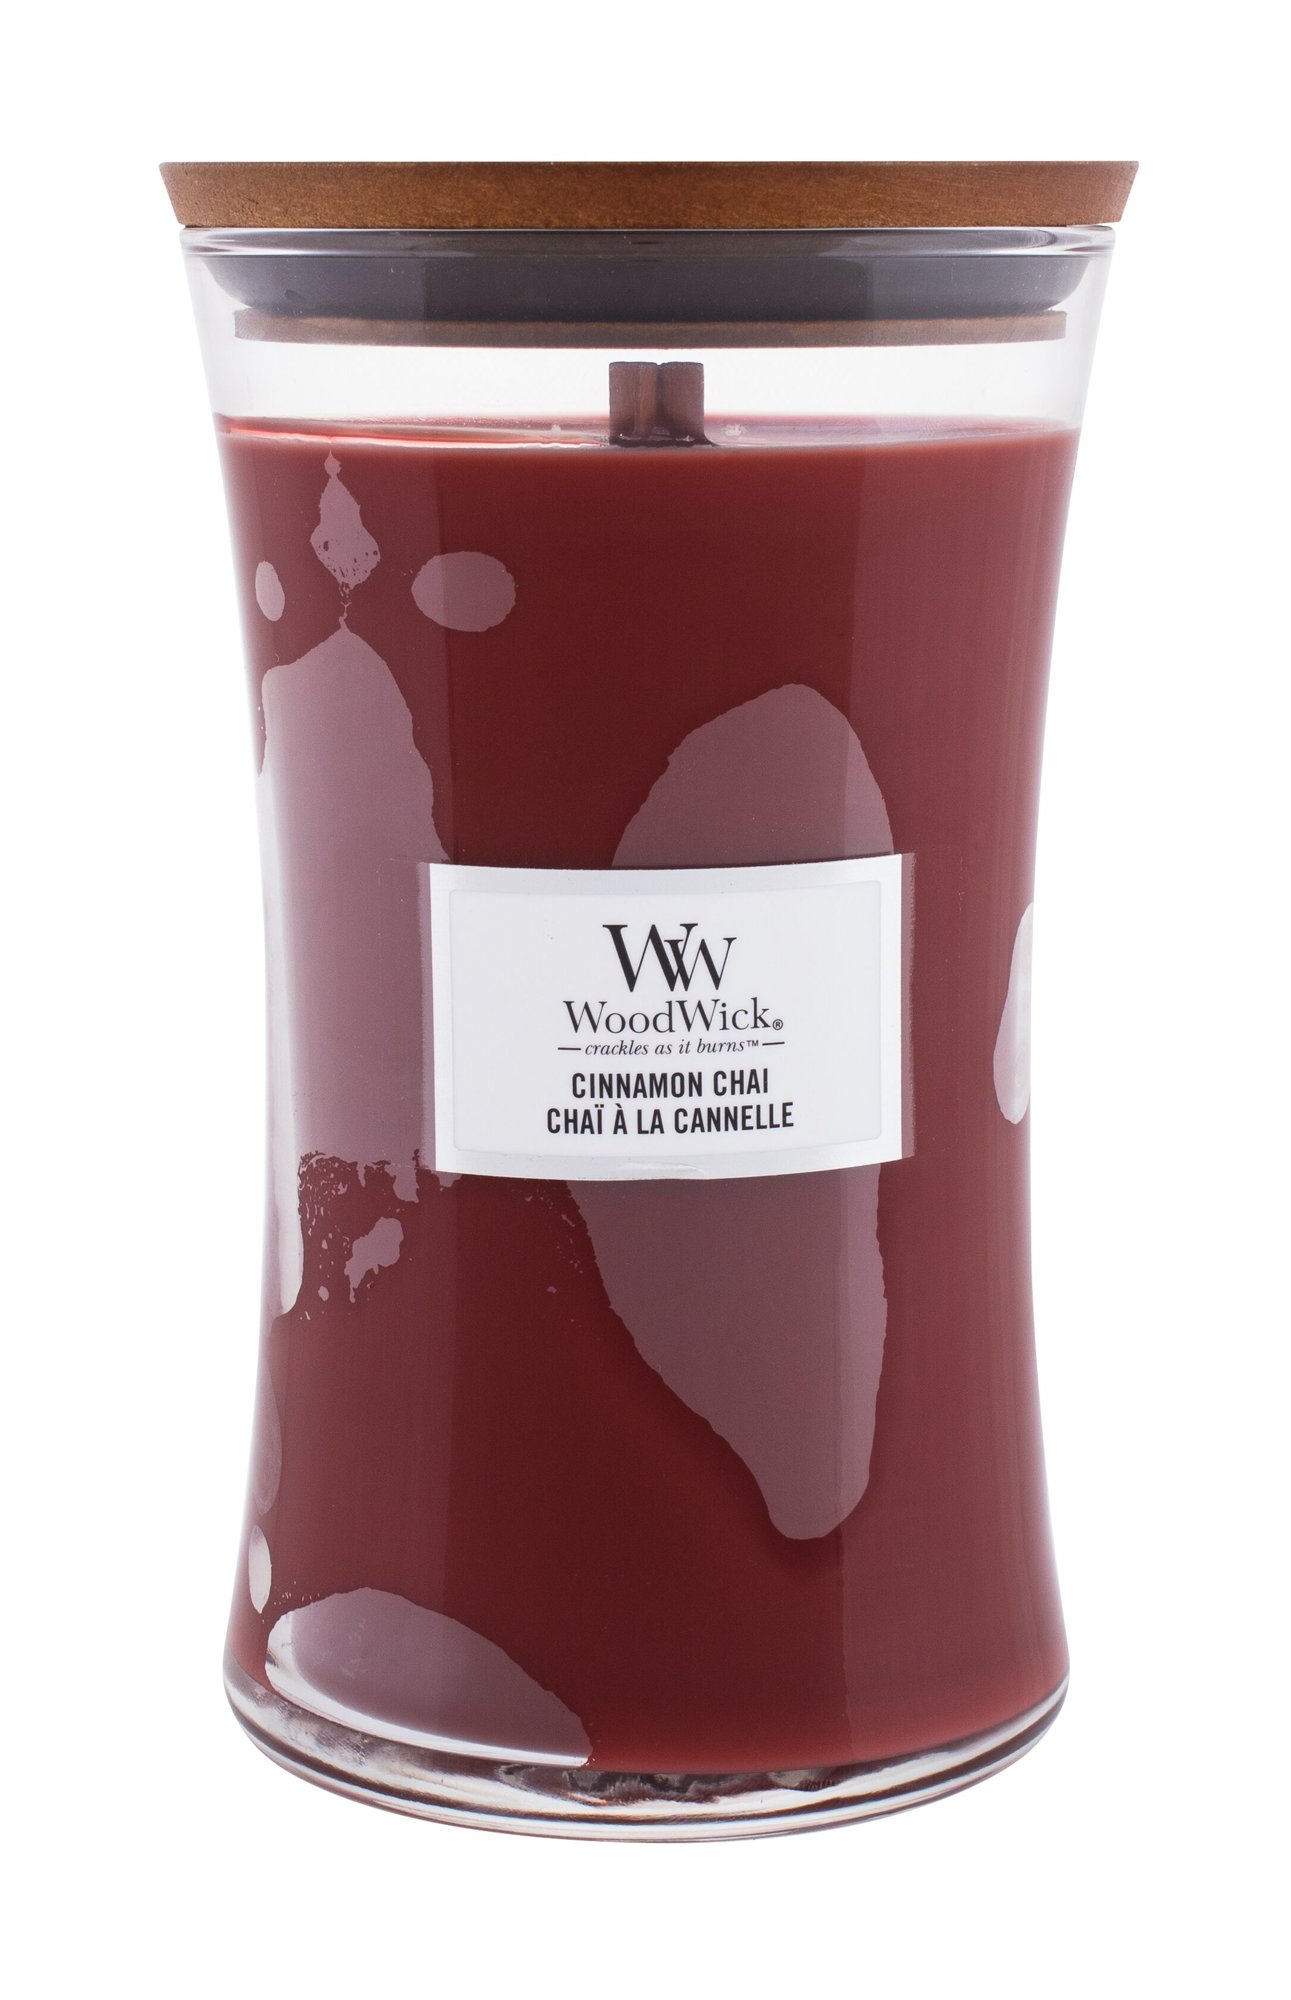 WoodWick Cinnamon Chai 610g Kvepalai Unisex Scented Candle